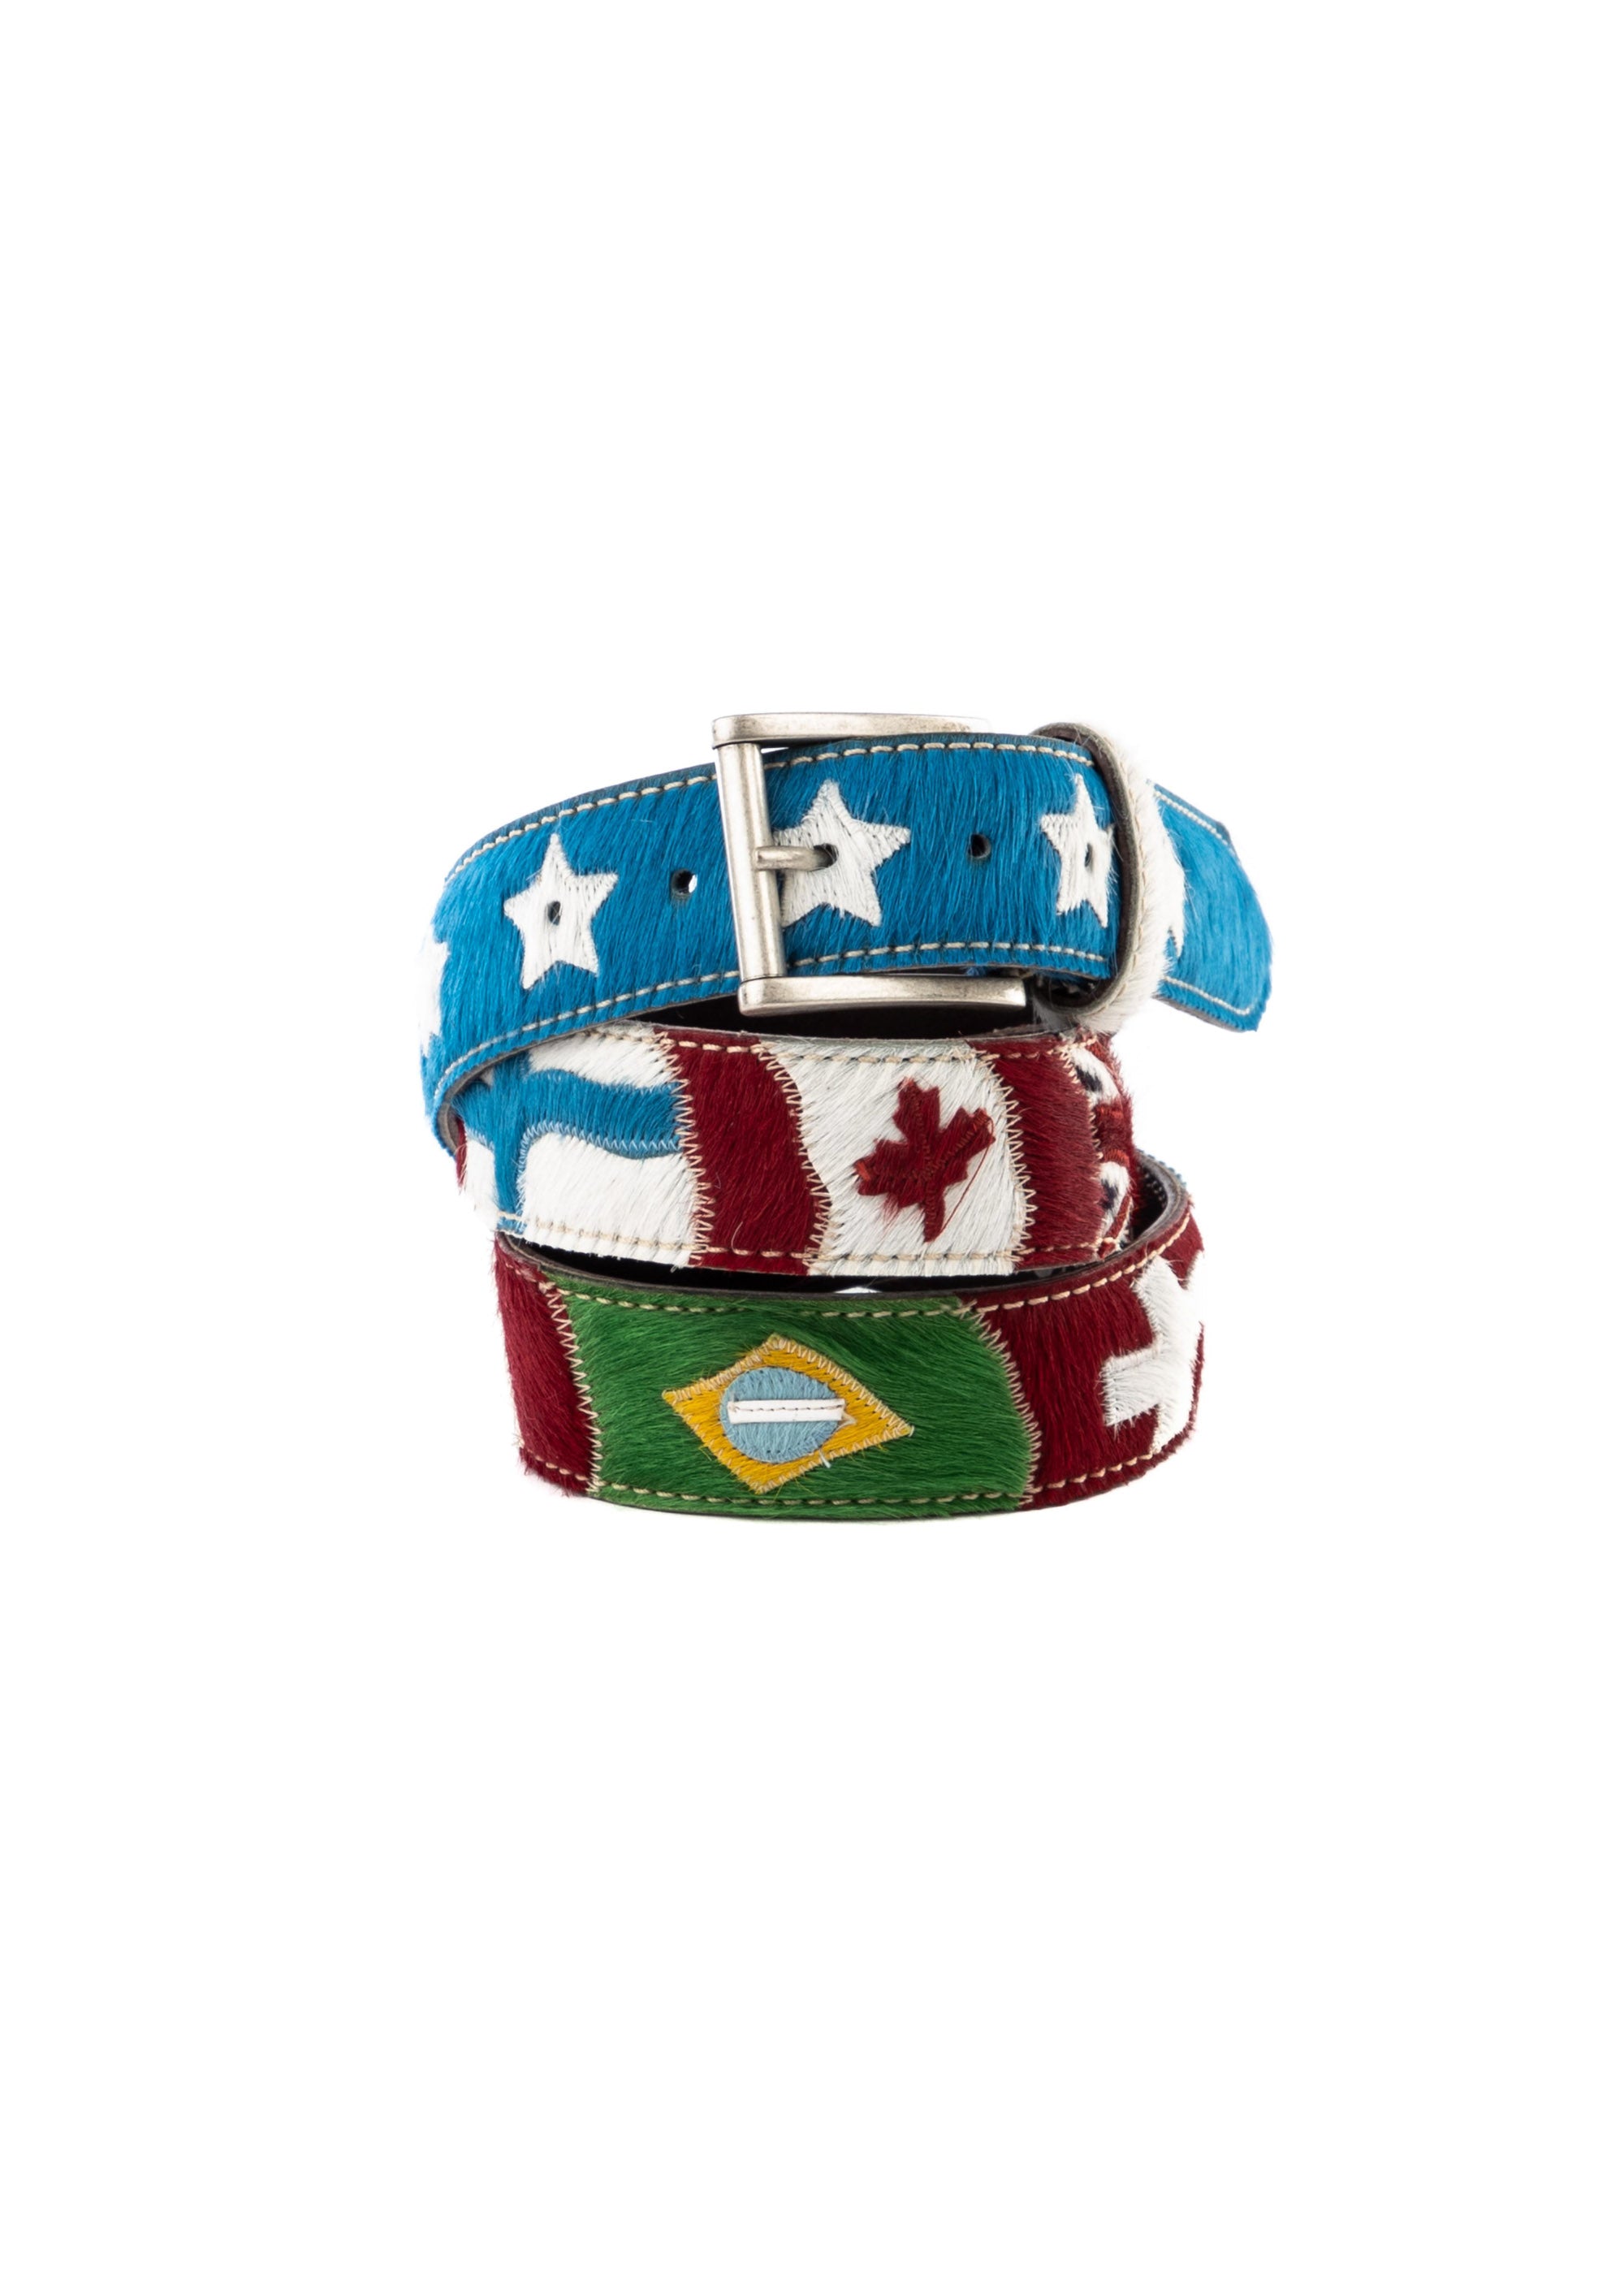 Handcrafted multicolor "horse flags" belt